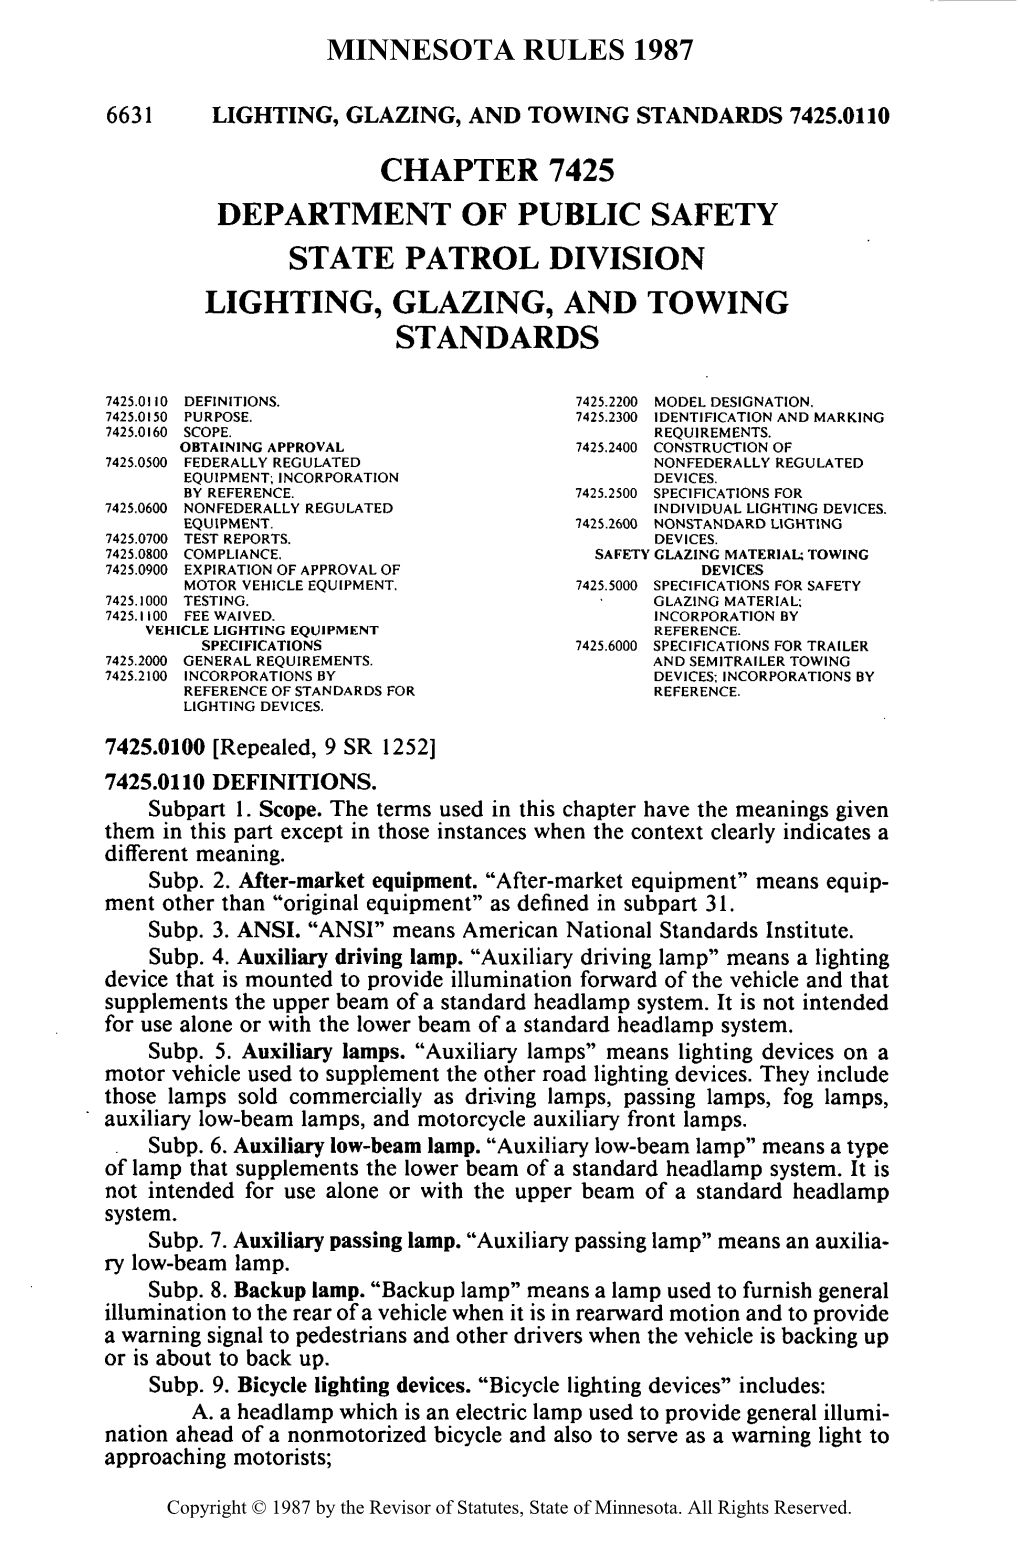 7425.0110 Chapter 7425 Department of Public Safety State Patrol Division Lighting, Glazing, and Towing Standards